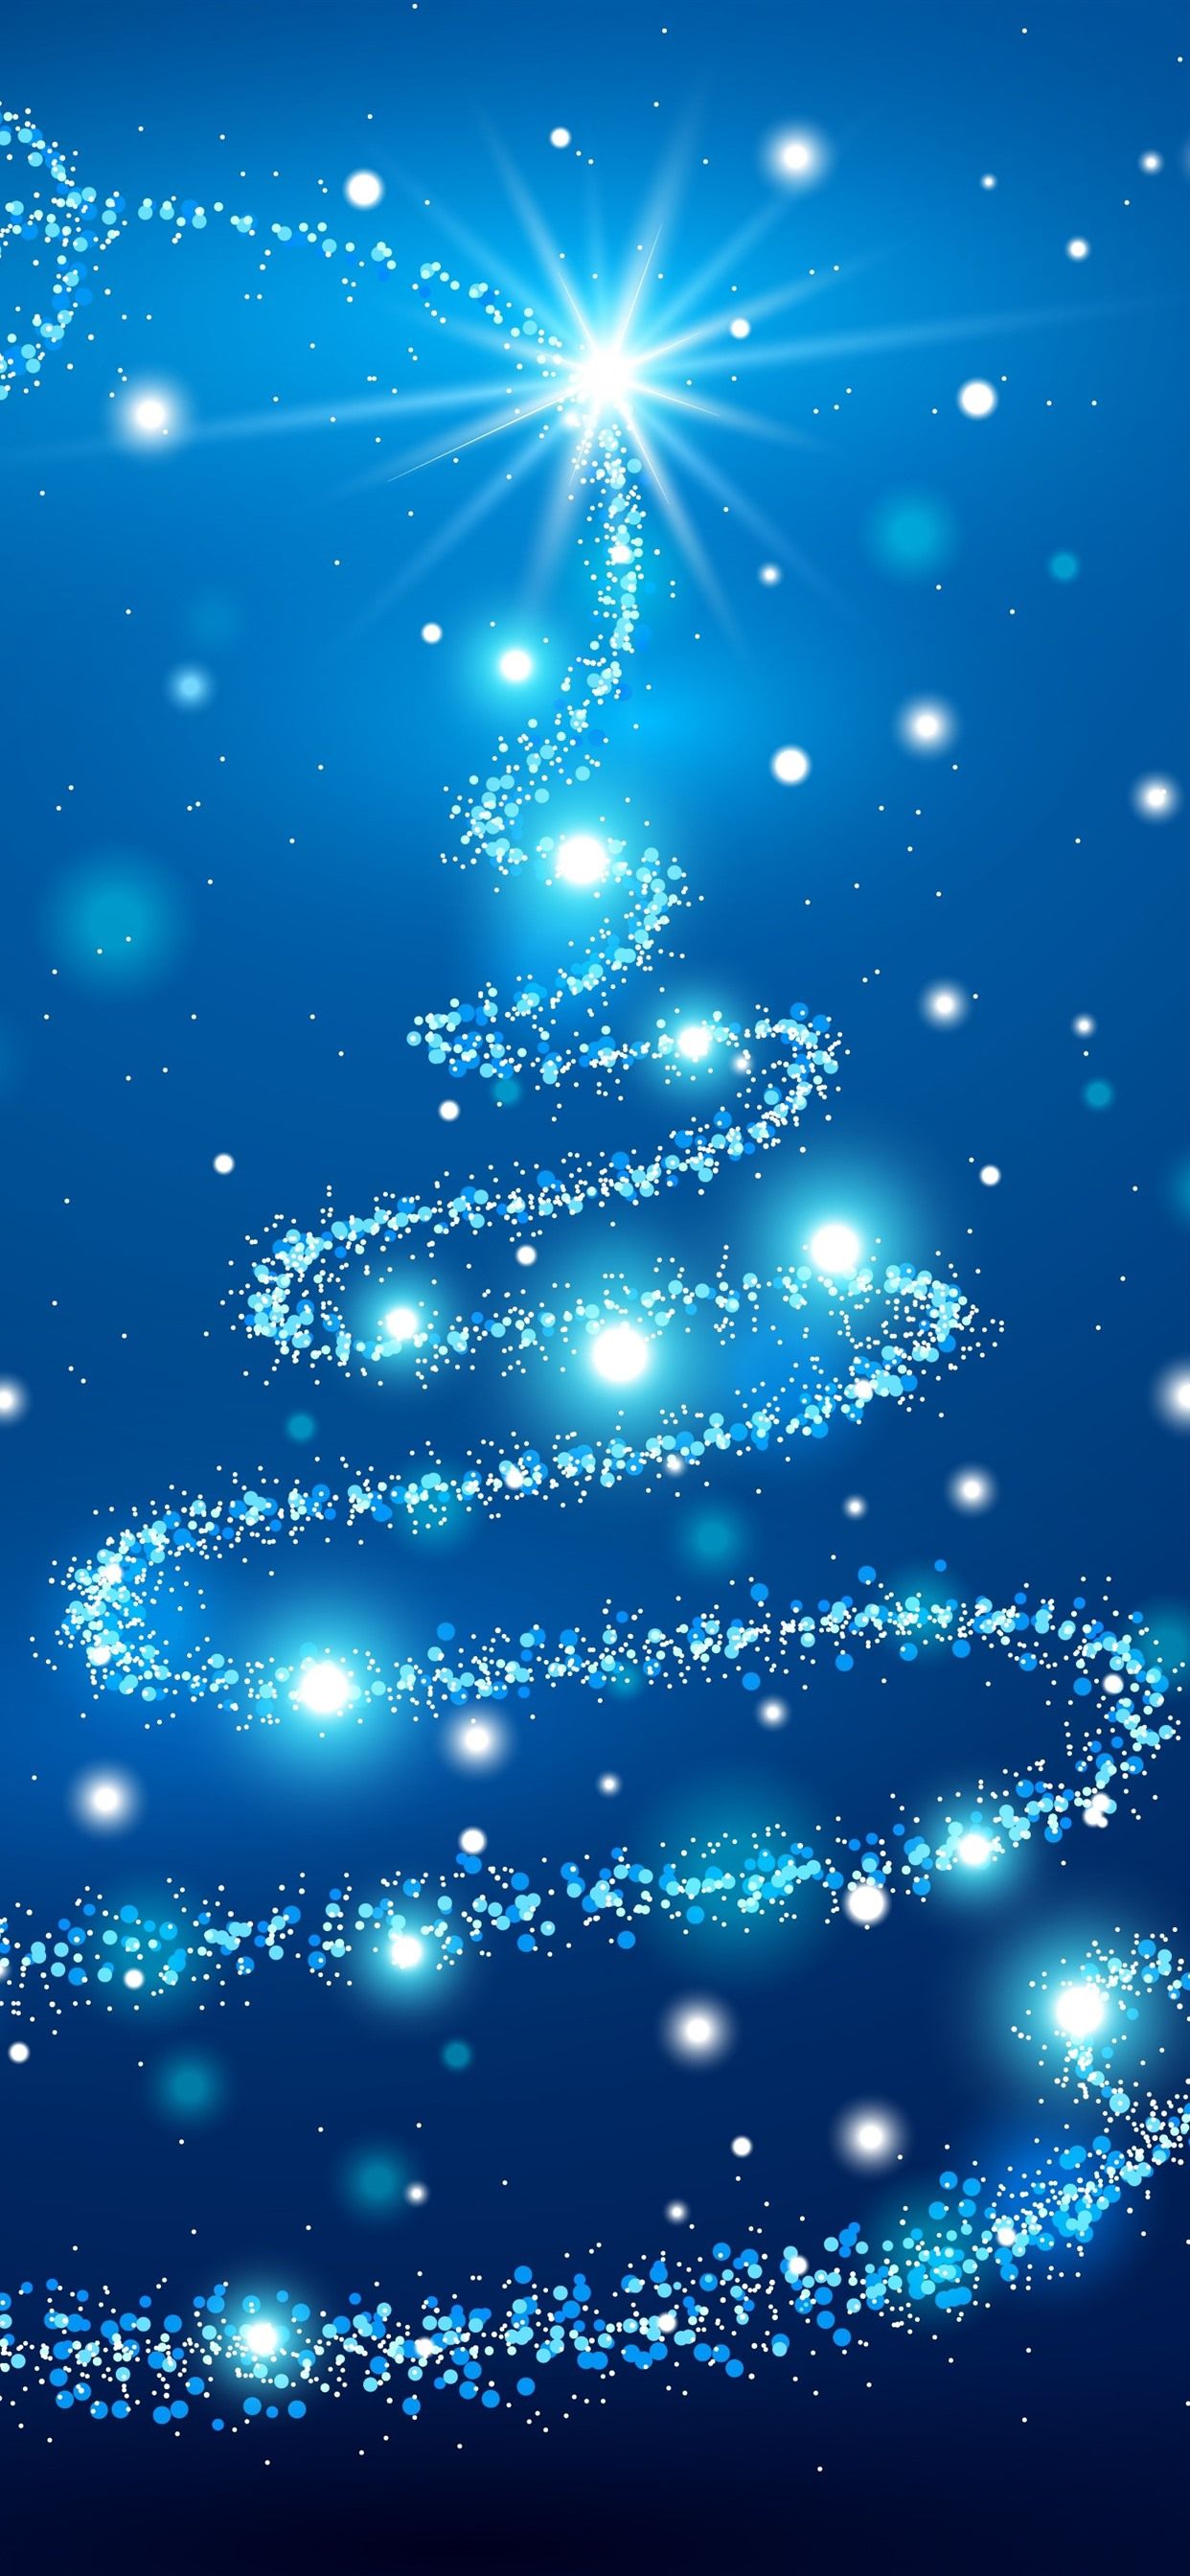 Blue Christmas tree, shine, stars 1242x2688 iPhone 11 Pro/XS Max wallpaper, background, picture, image